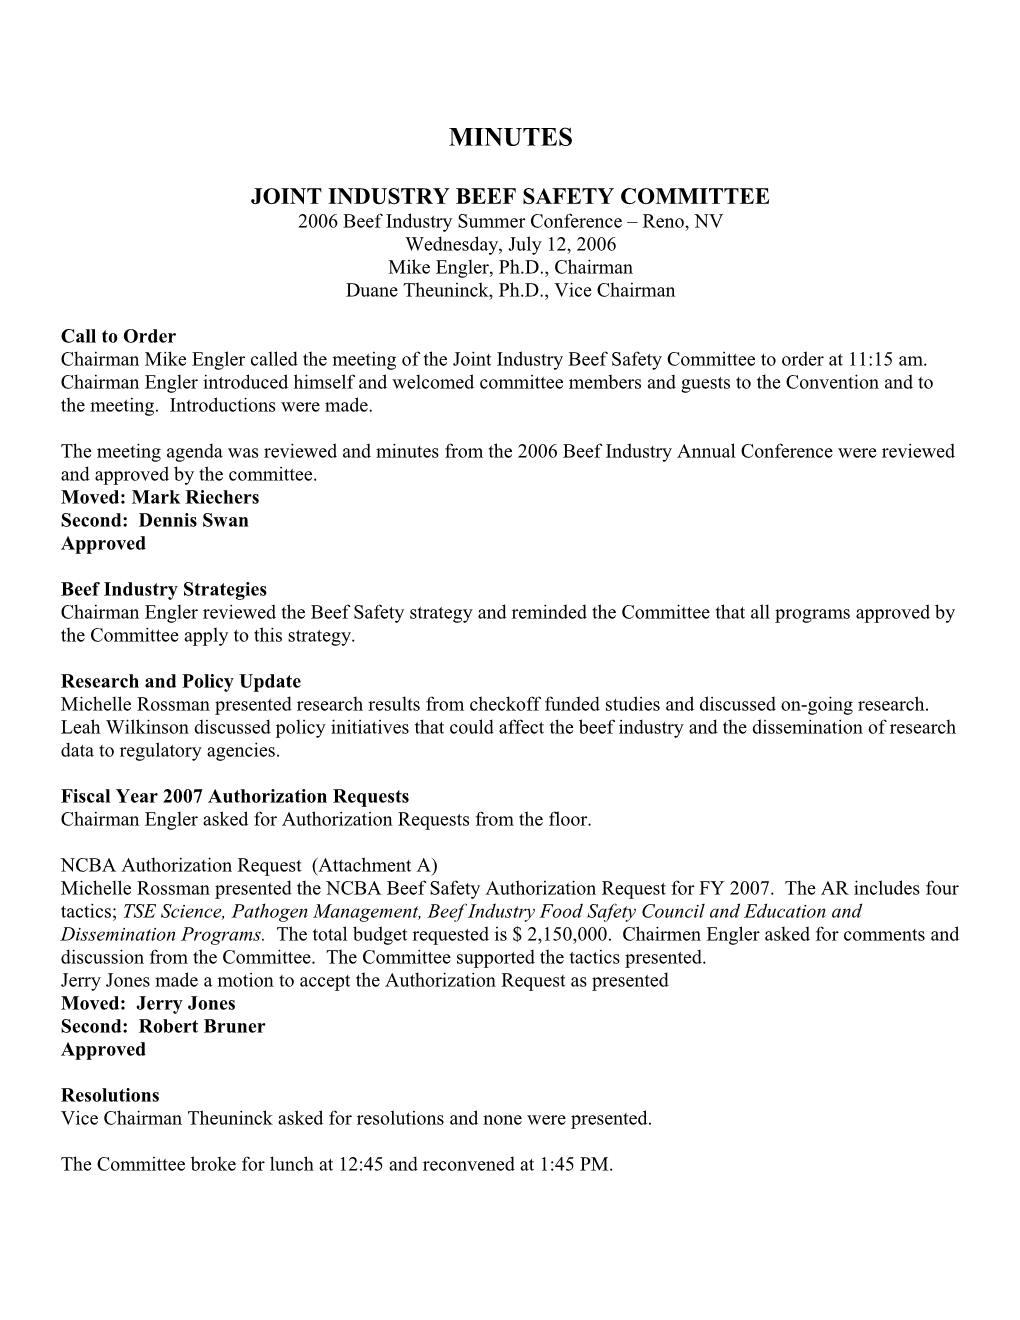 Joint Industry Beef Safety Committee